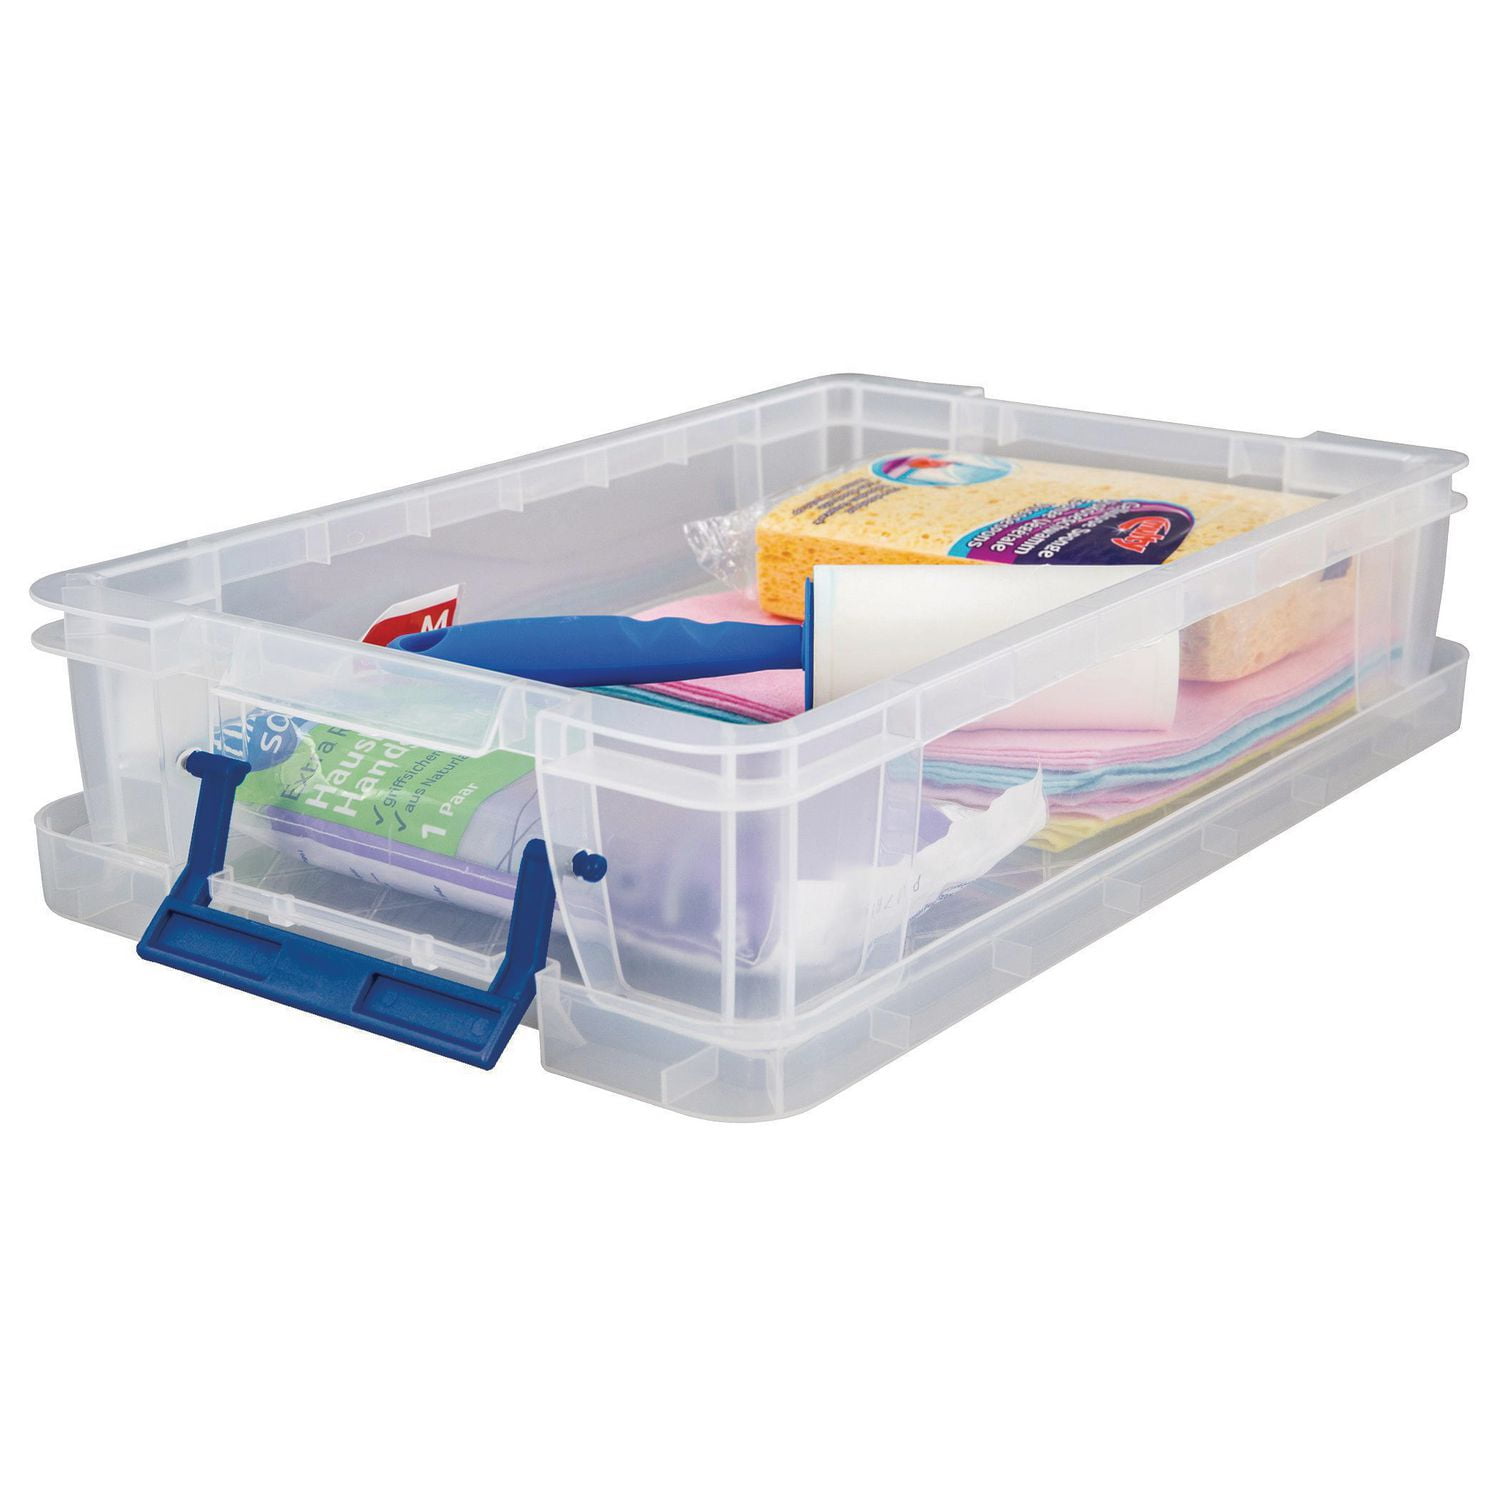 Bankers Box Clear Plastic Storage Boxes with Organizer Tray - Set of 5 7731702